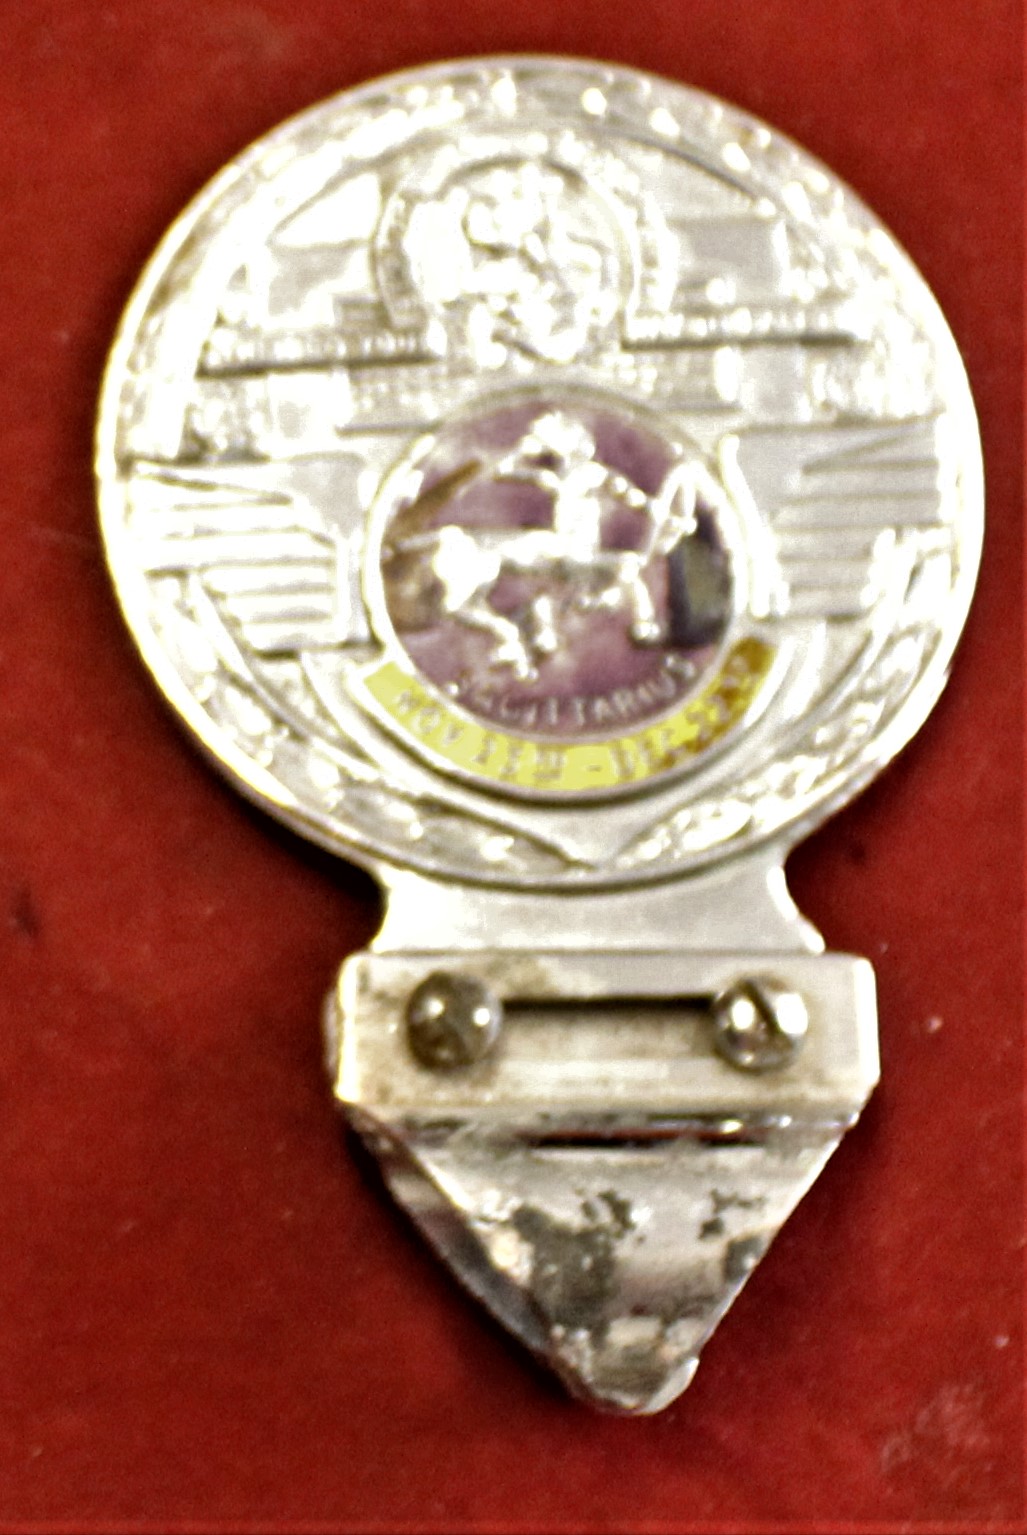 Vintage Car Badge Sagittarius Nov 23rd-Dec 22nd motto above sign of the zodiac, "Behold St